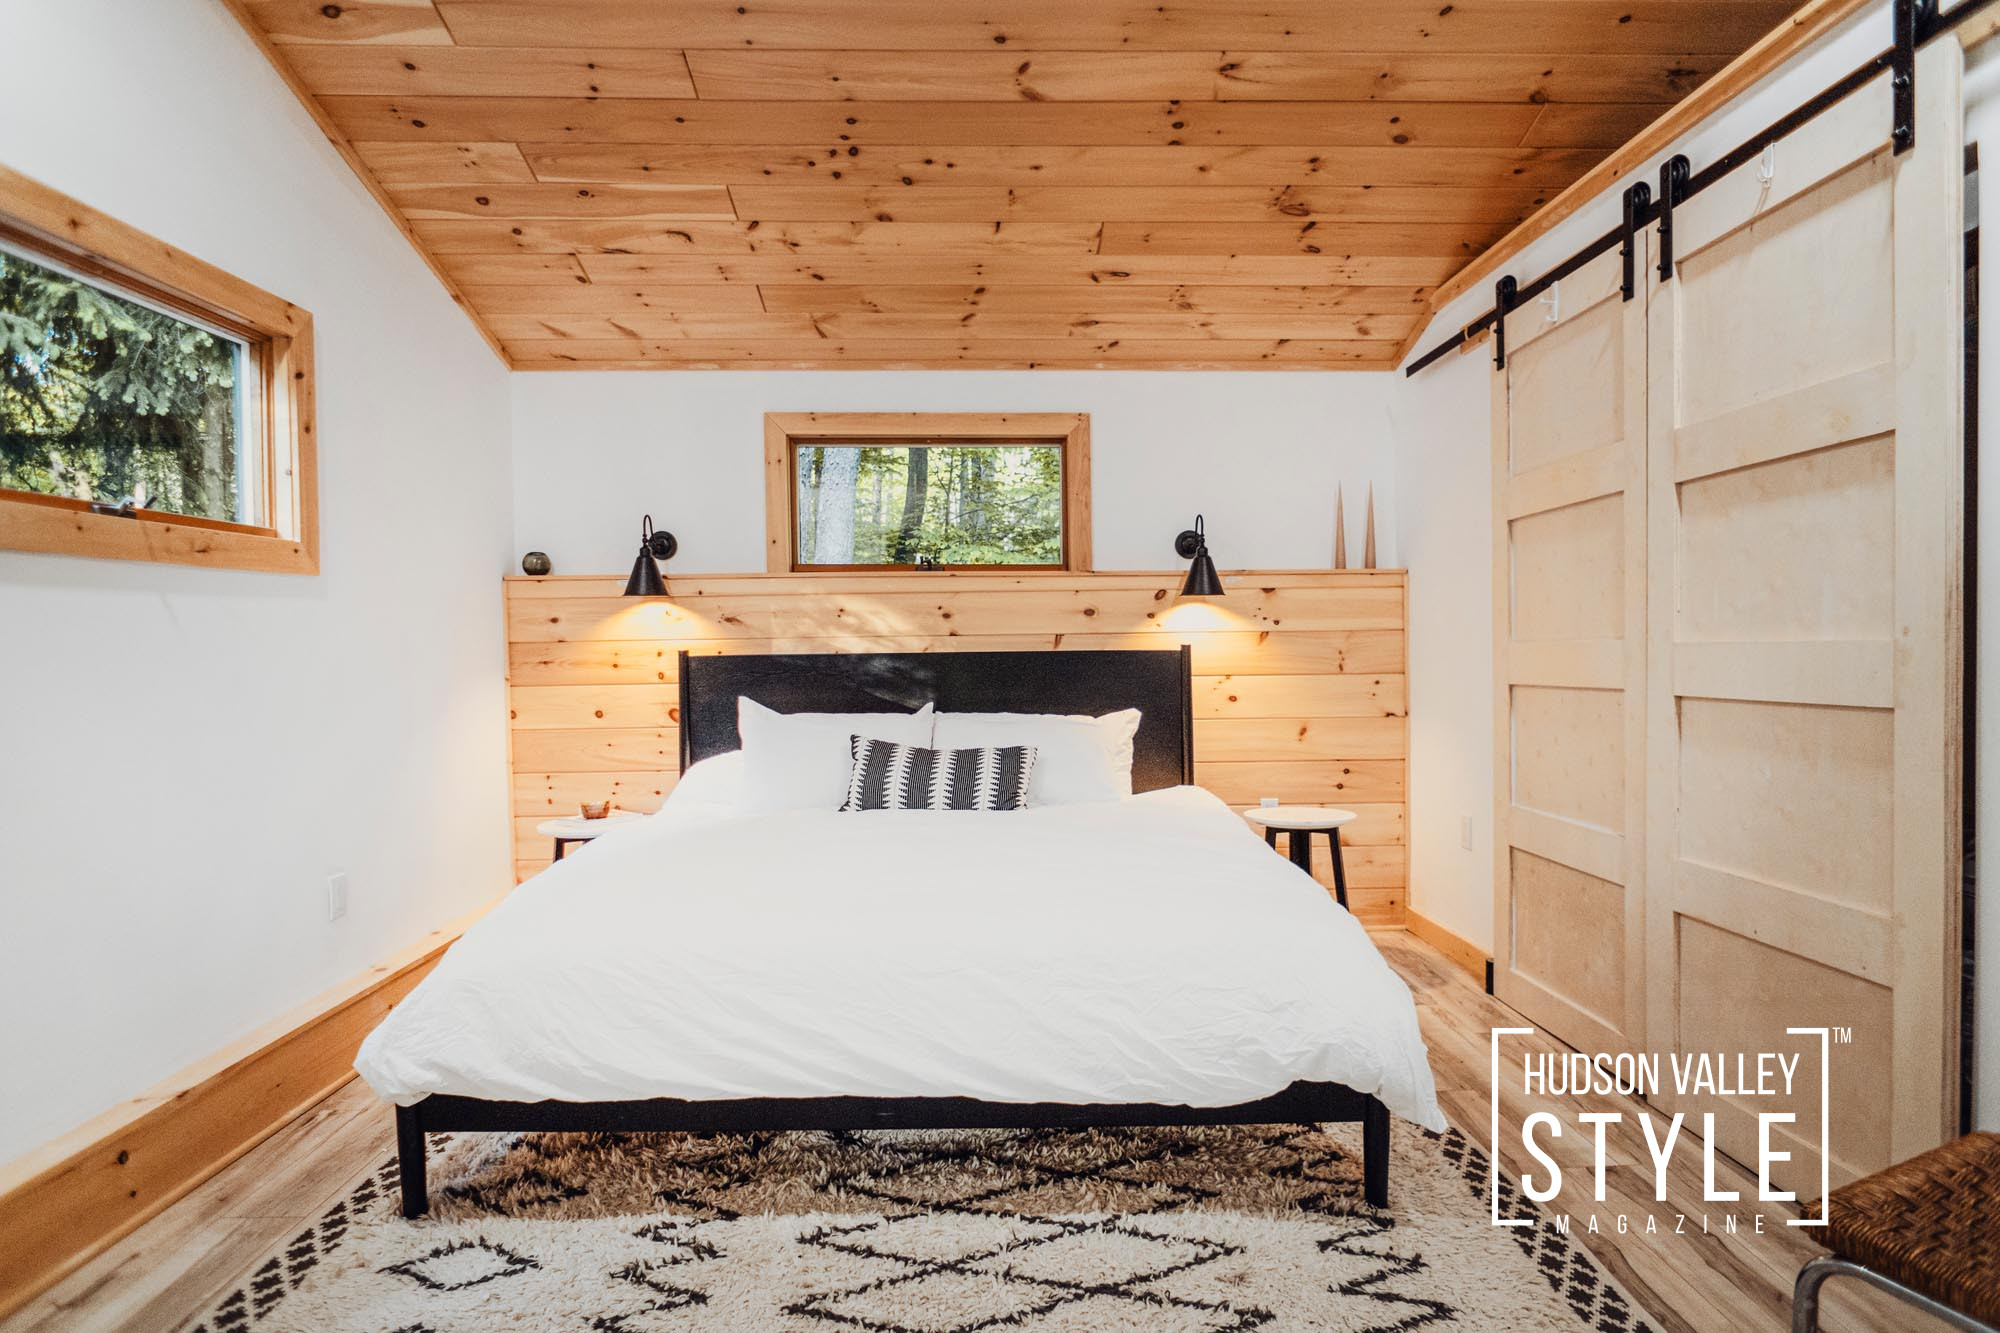 Discover a Cozy Modern Rustic Cabin With Stunning Views of the Catskill Mountains